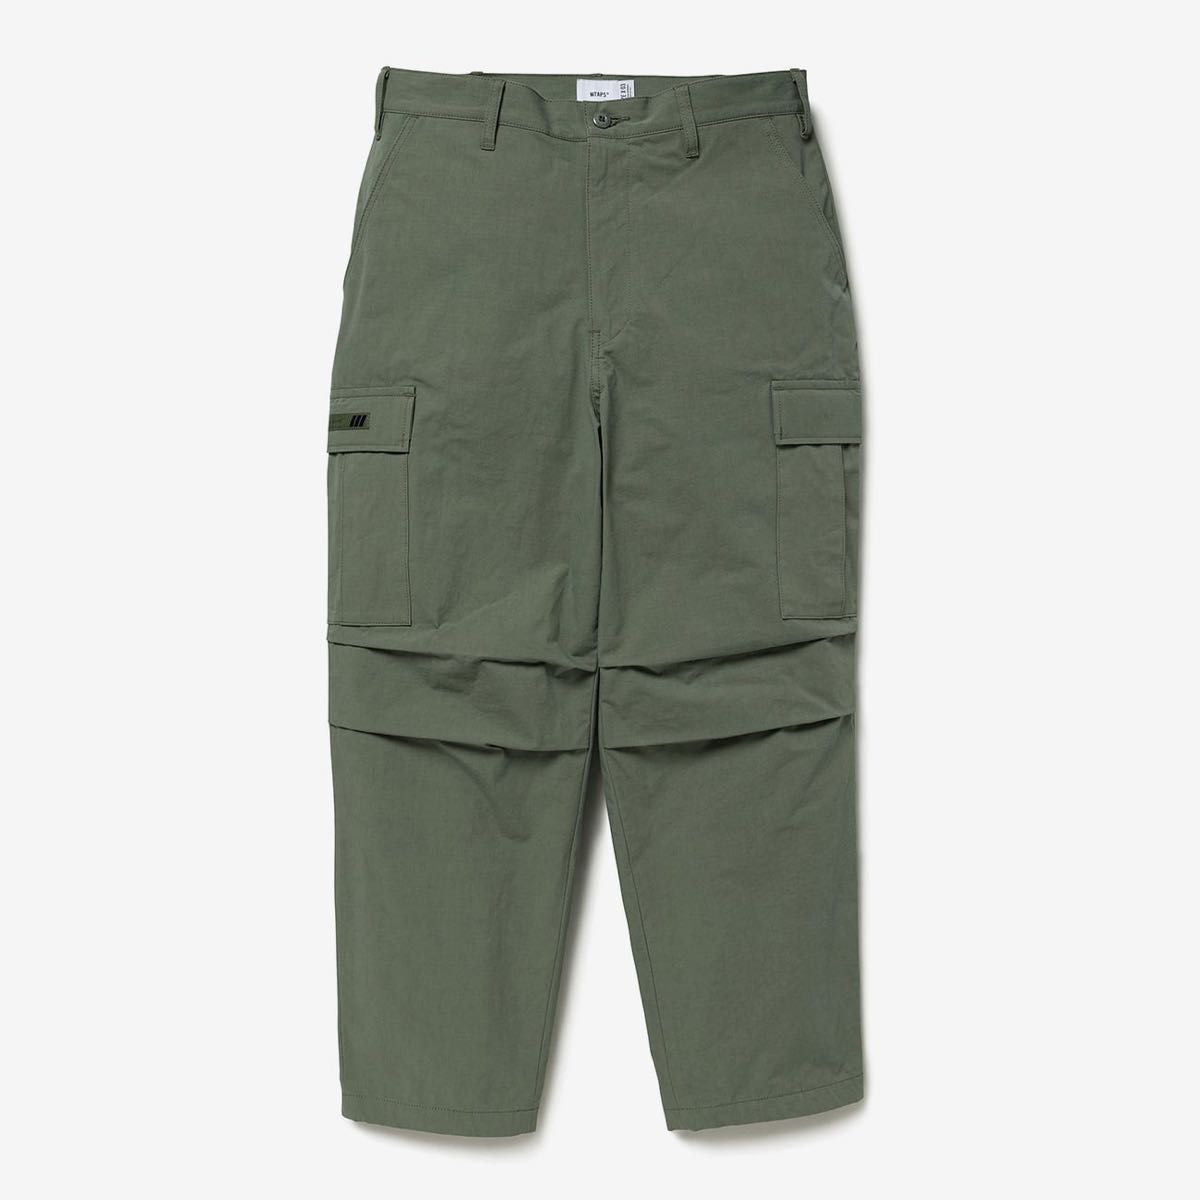 WTAPS MILT9601 / TROUSERS / NYCO RIPSTOP｜PayPayフリマ